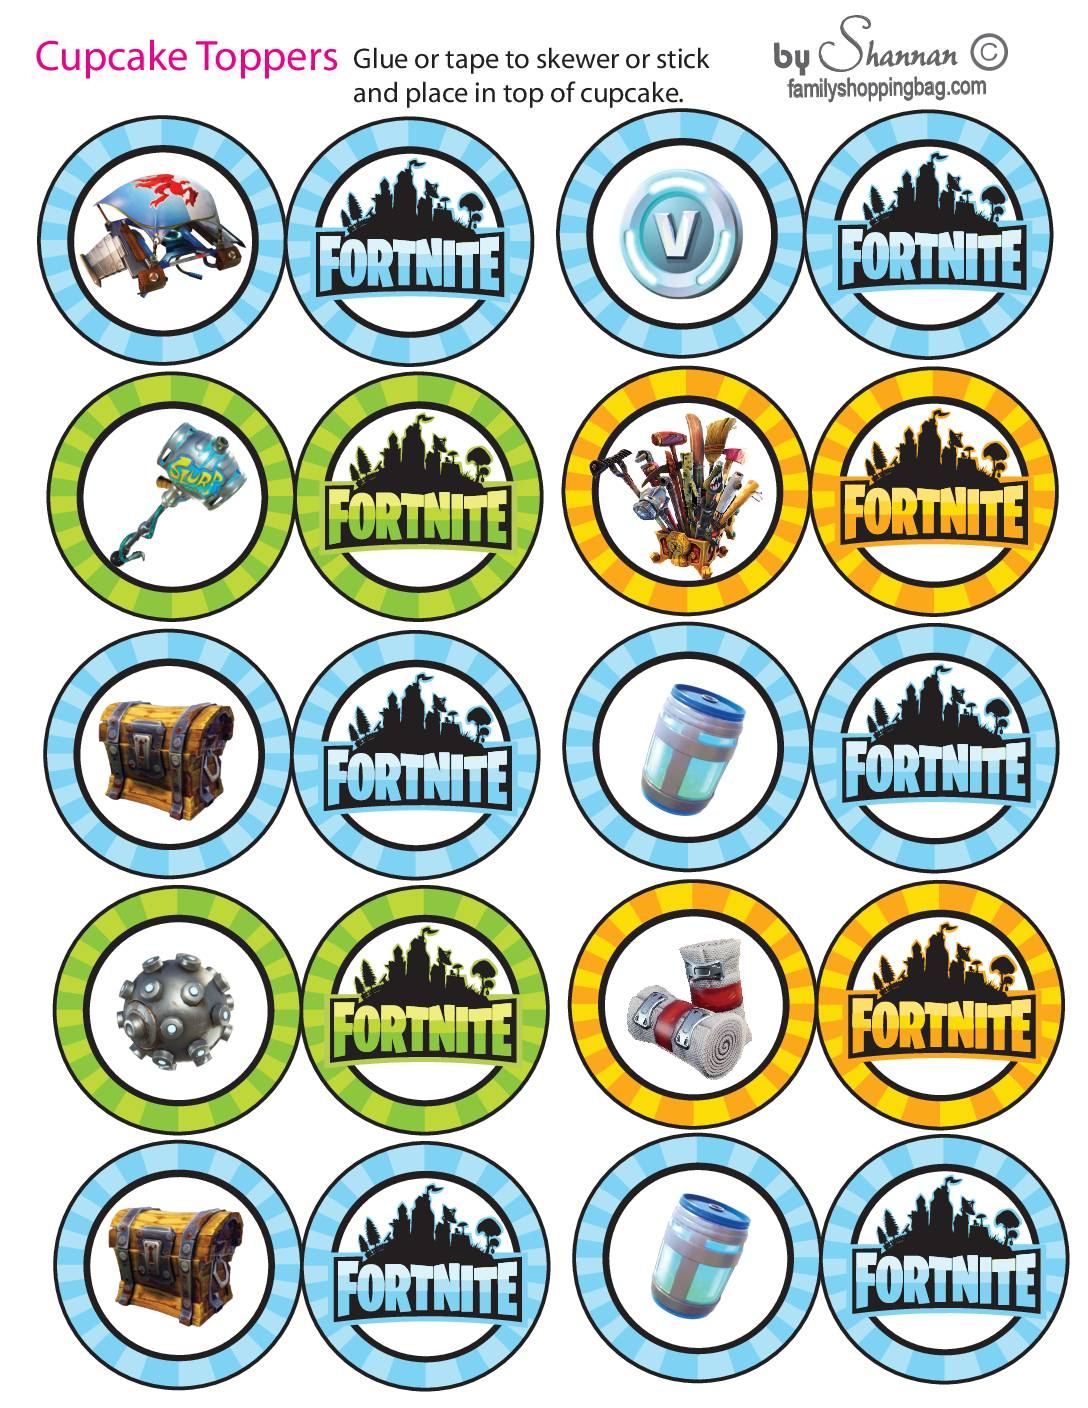 Cupcake Toppers Fortnite within Free Printable Fortnite Cupcake Toppers